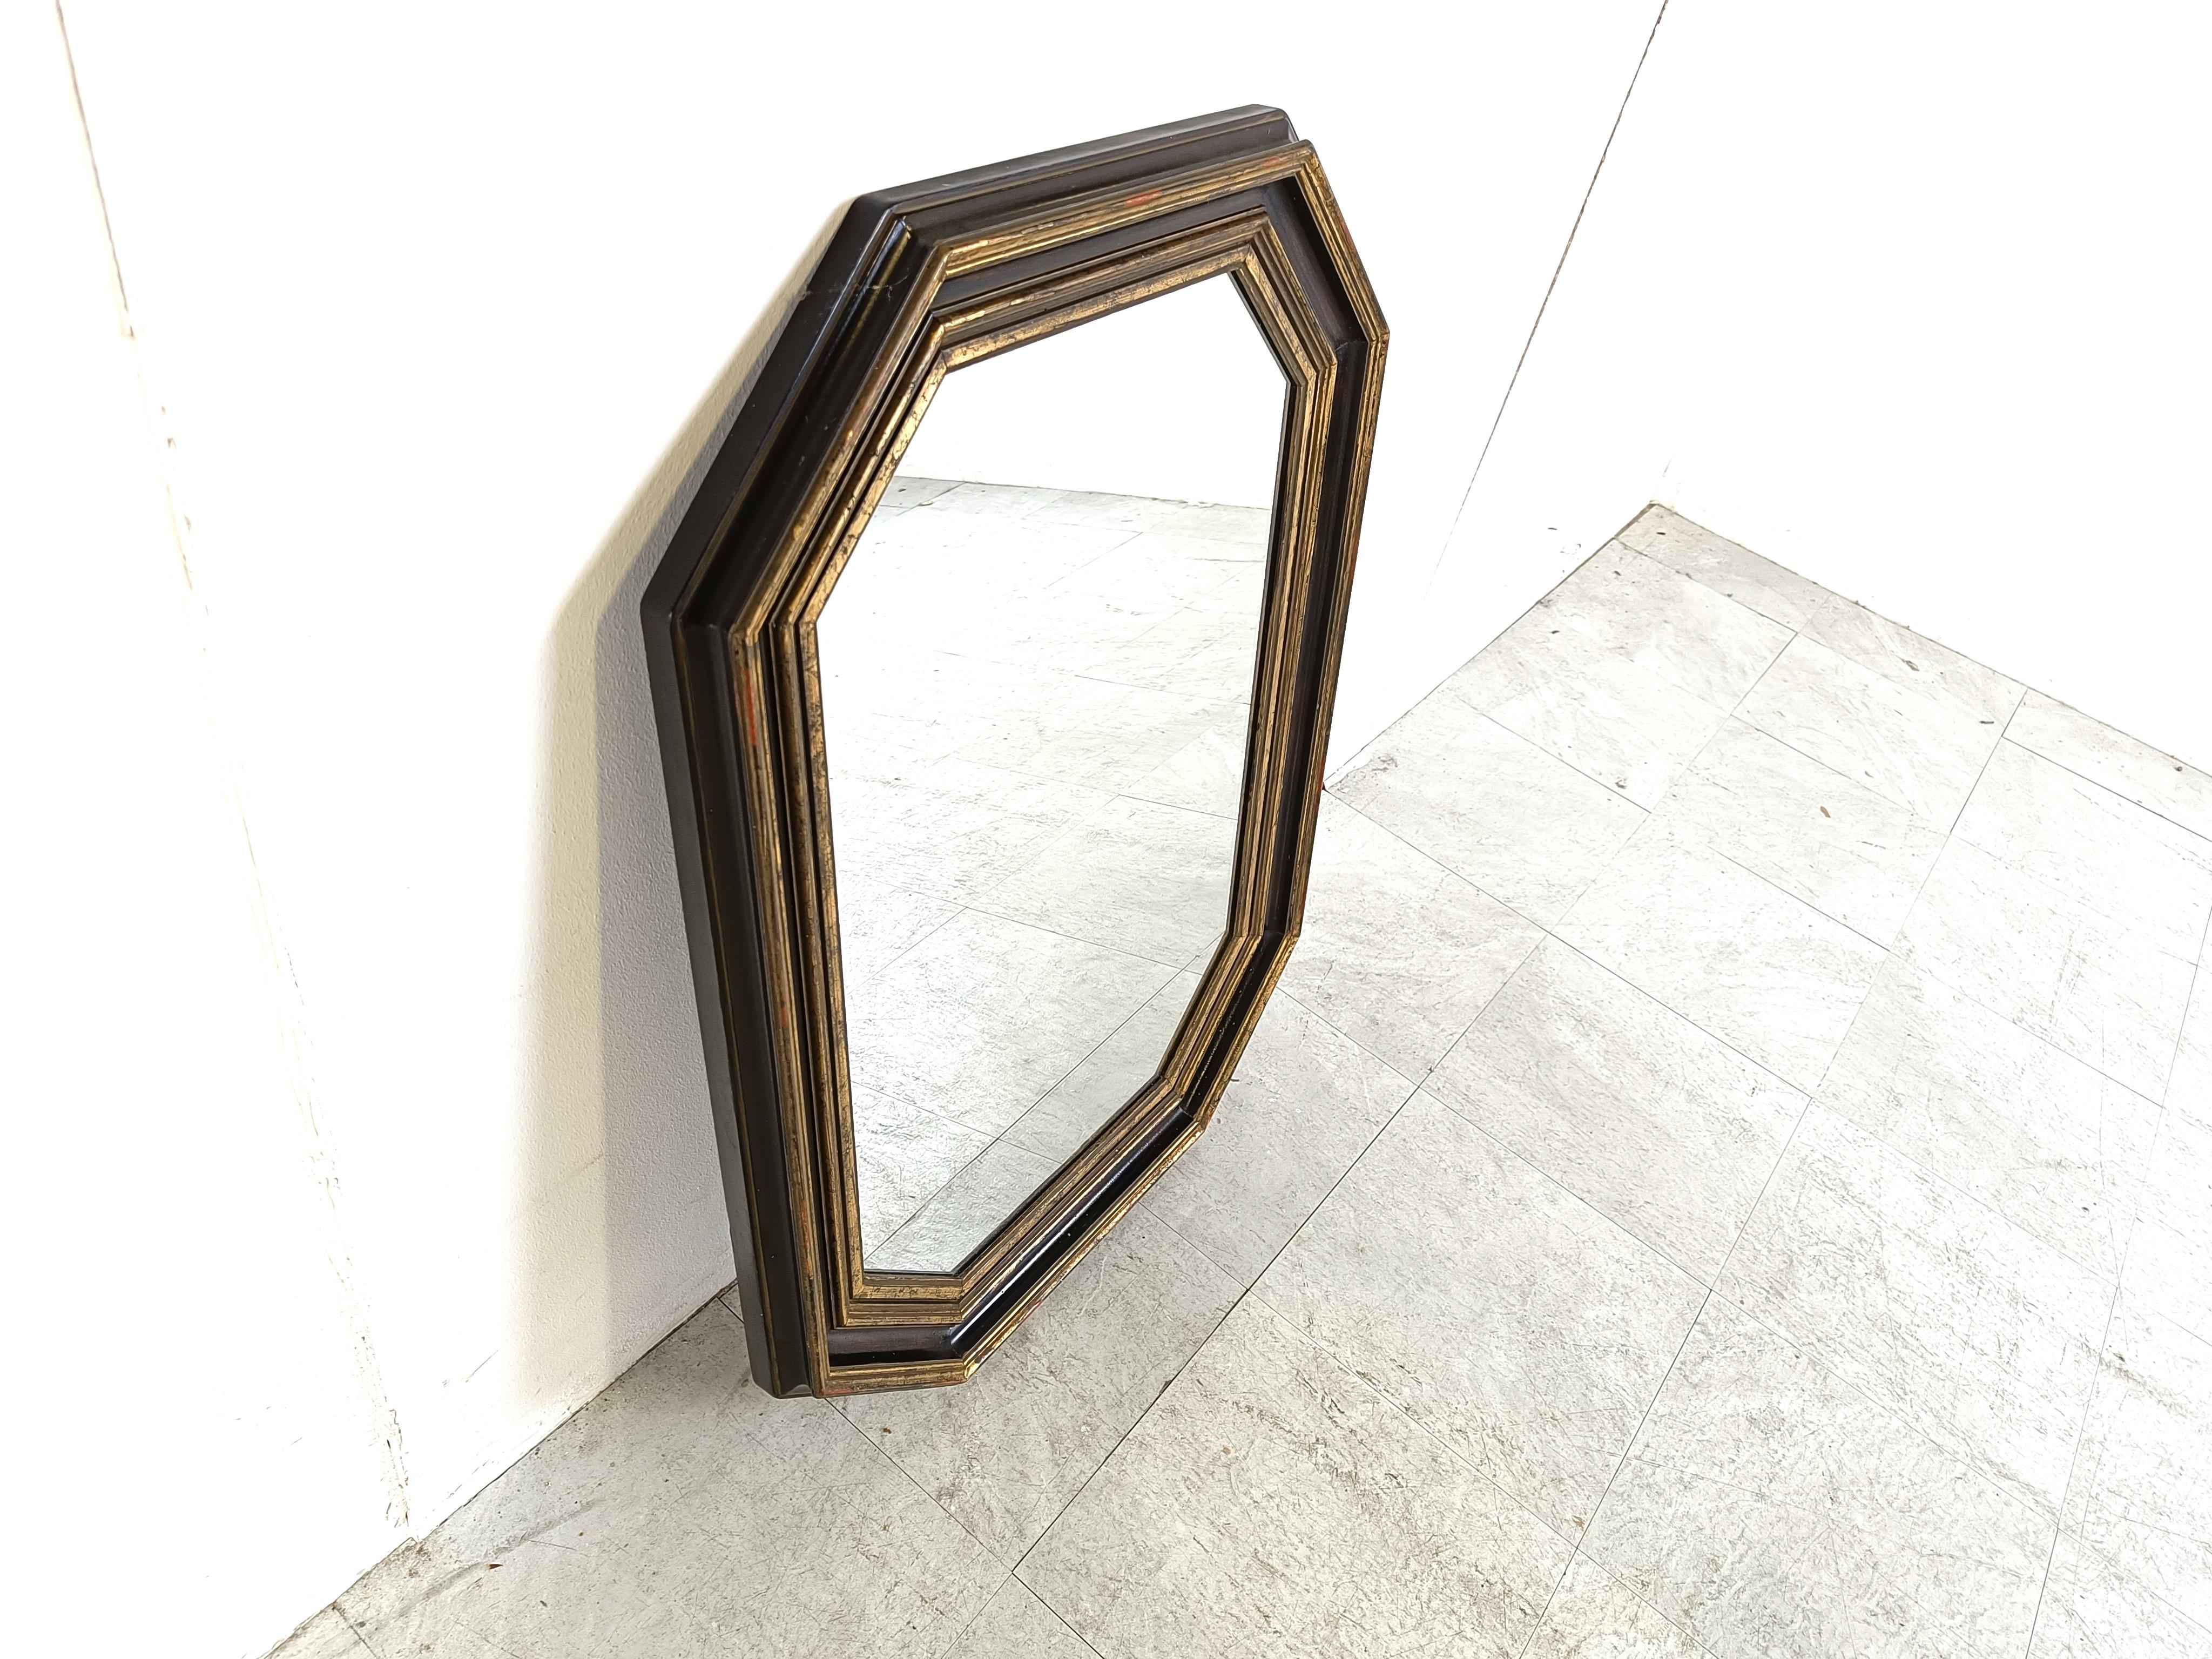 Seventies wall mirror made in Belgium.

Octogonal design with a gilt and ebonized wooden frame.

This mirror was made by Deknudt.

1970s - Belgium

Dimensions:
Height: 85cm/33.46